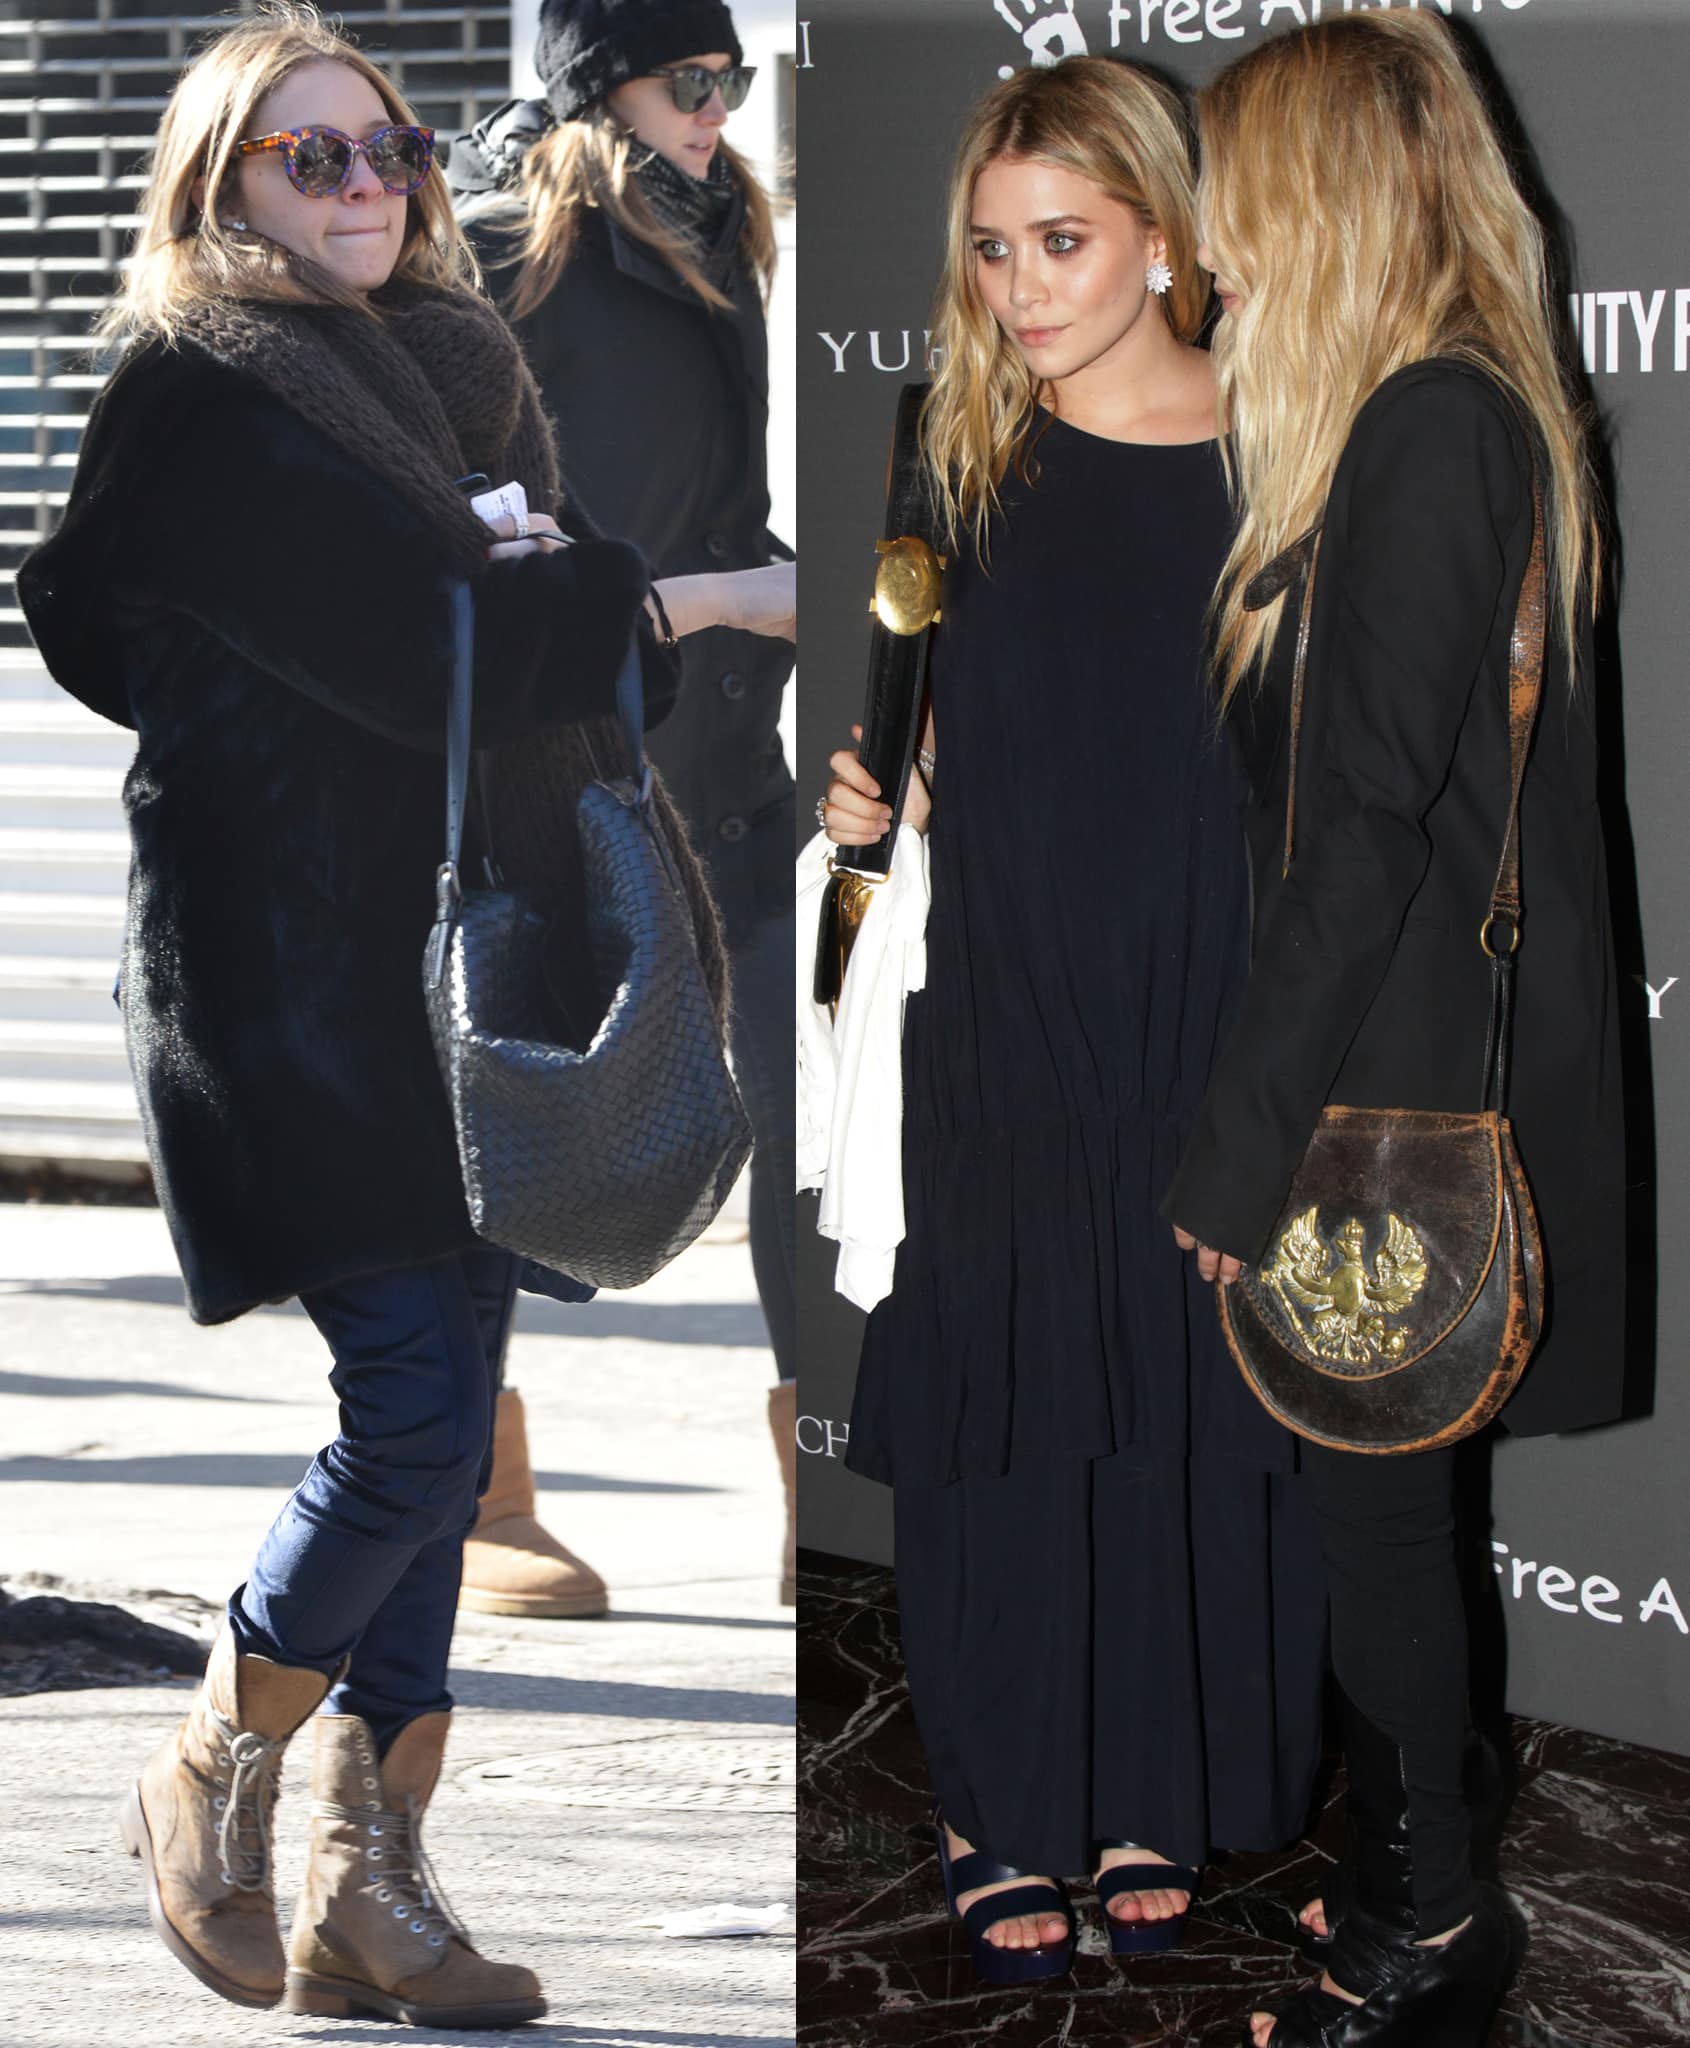 Mary-Kate and Ashley Olsen are among those who popularized hobo bags as part of the Boho-chic trend